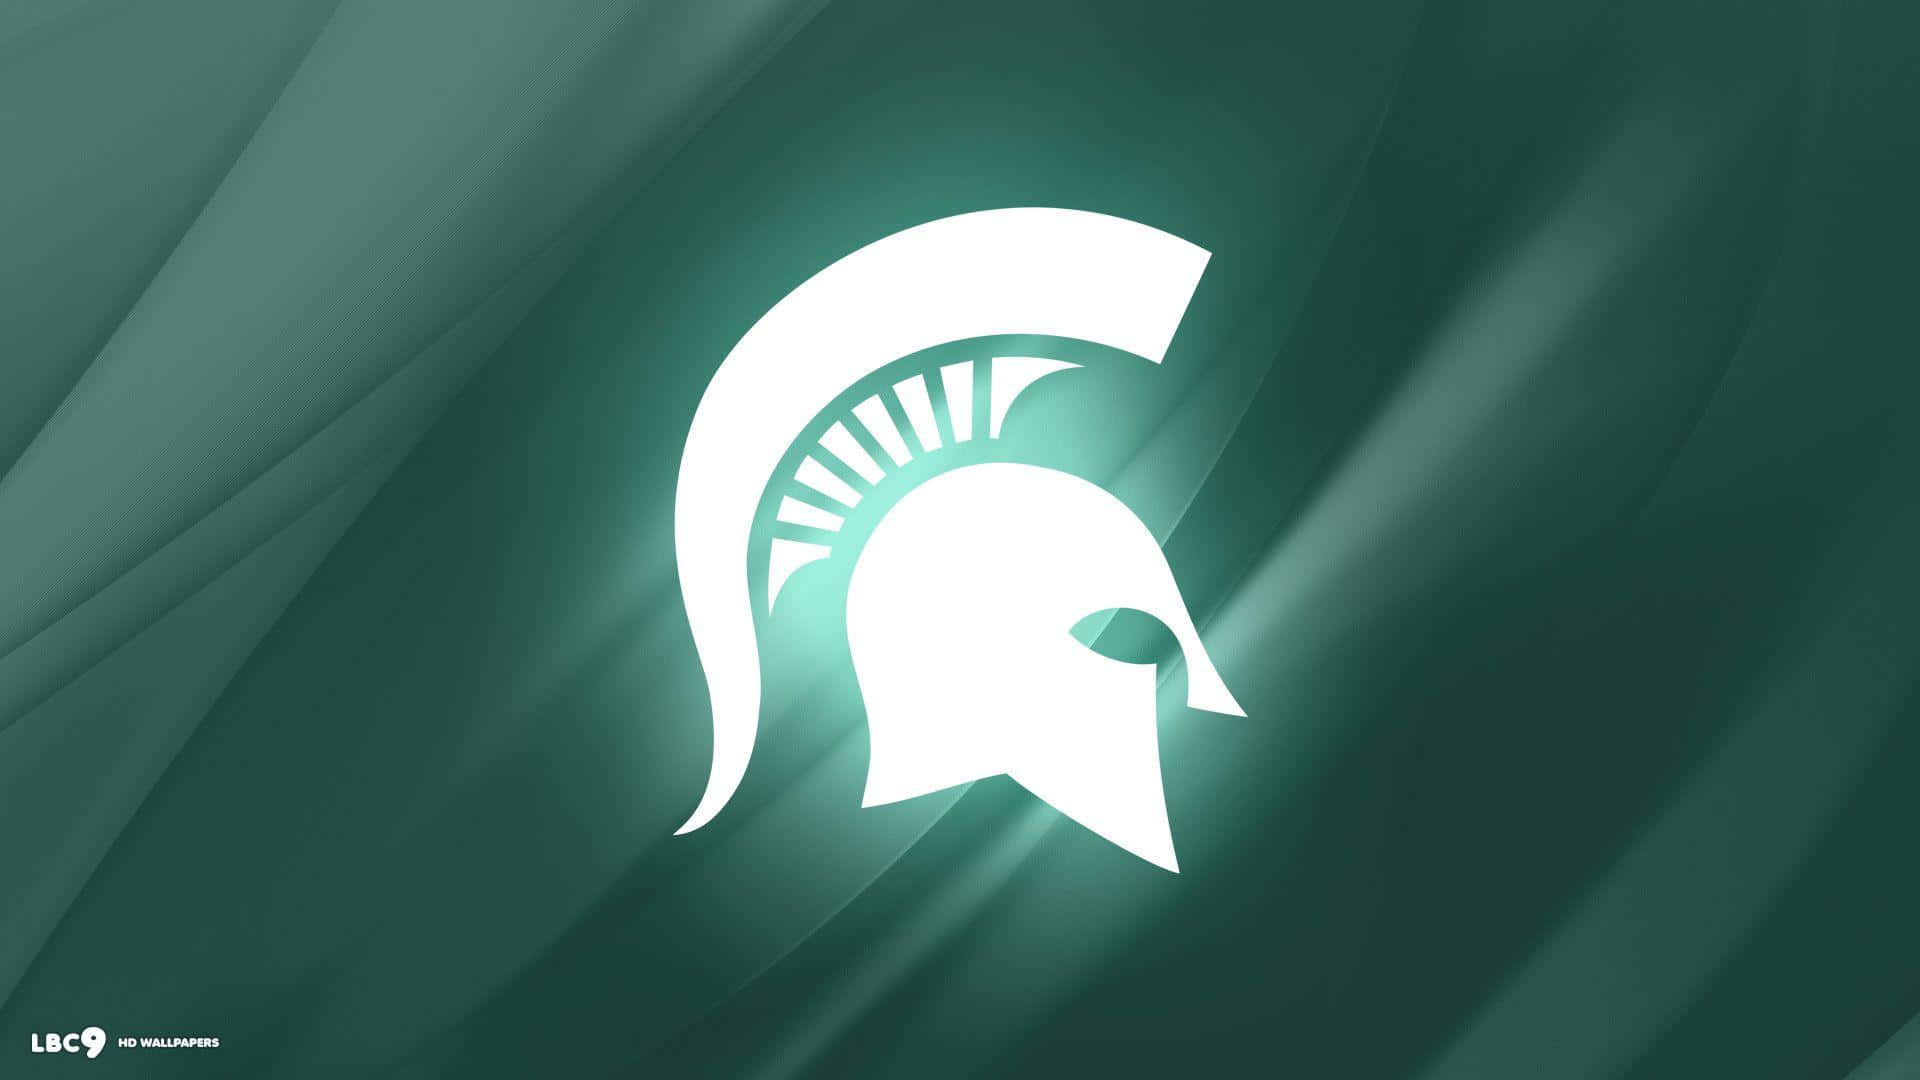 Michigan State Spartans Logo On A Green Background